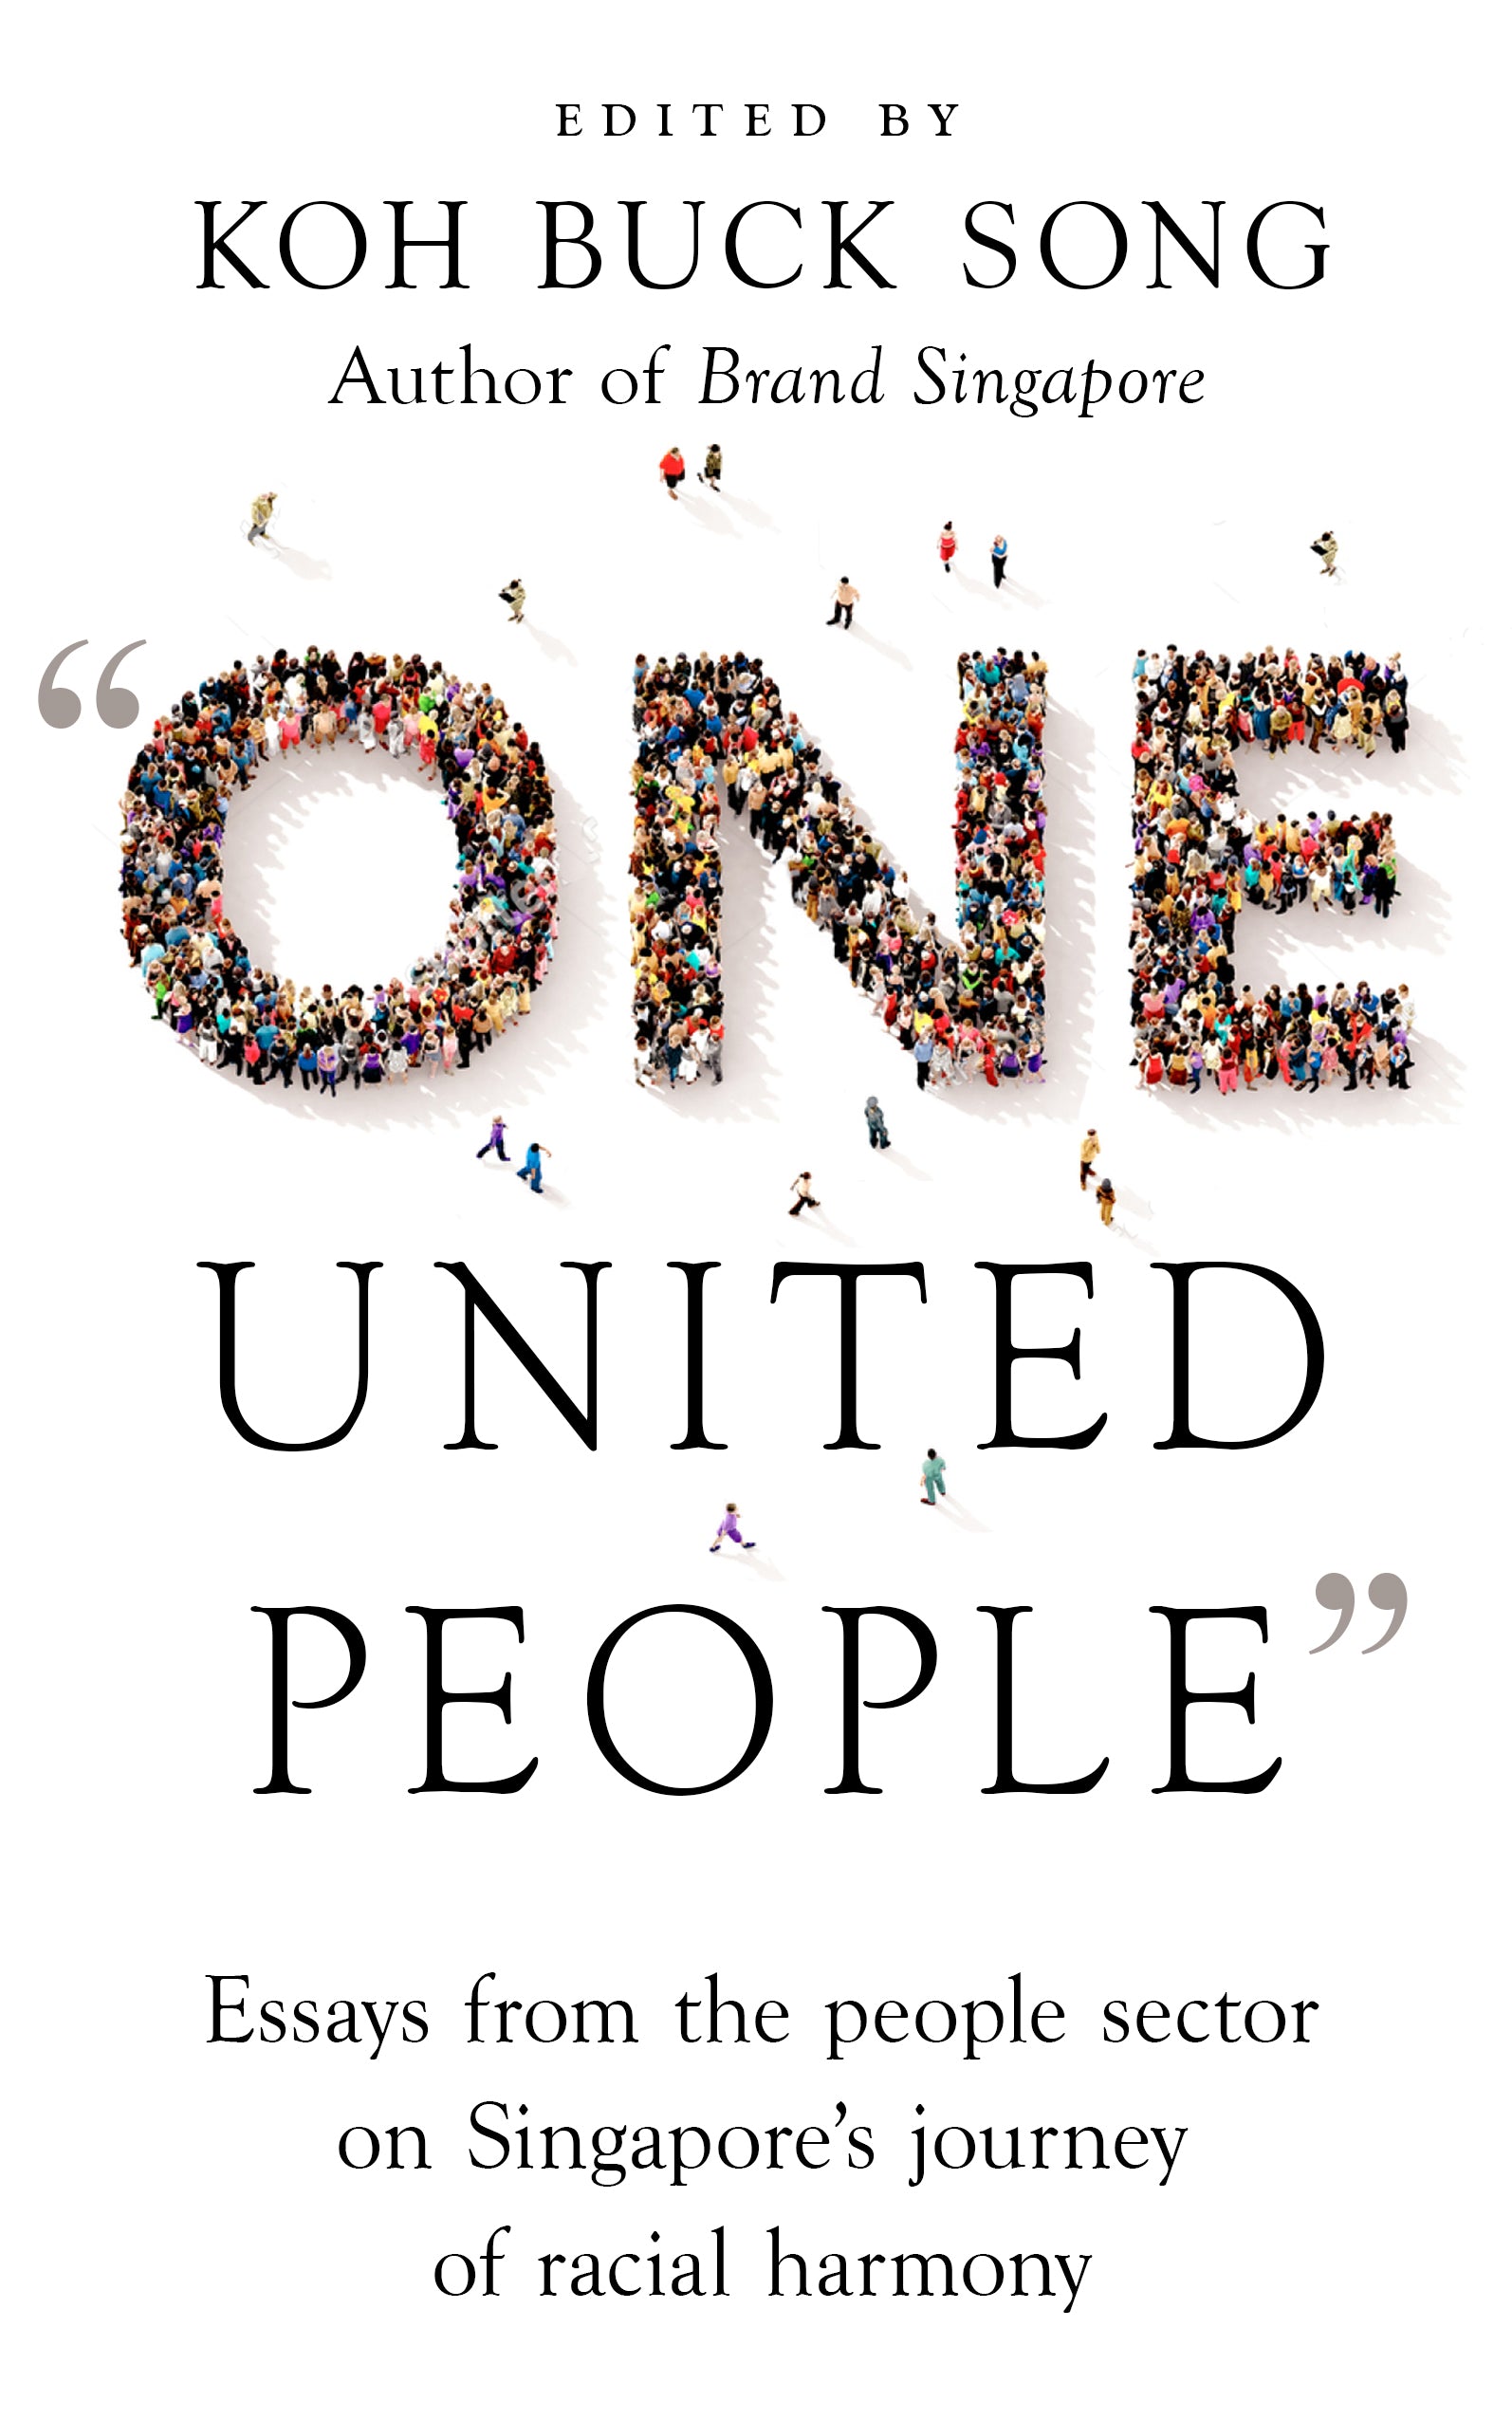 One United People: Essays from the People Sector on Singapore’s Journey of Racial Harmony